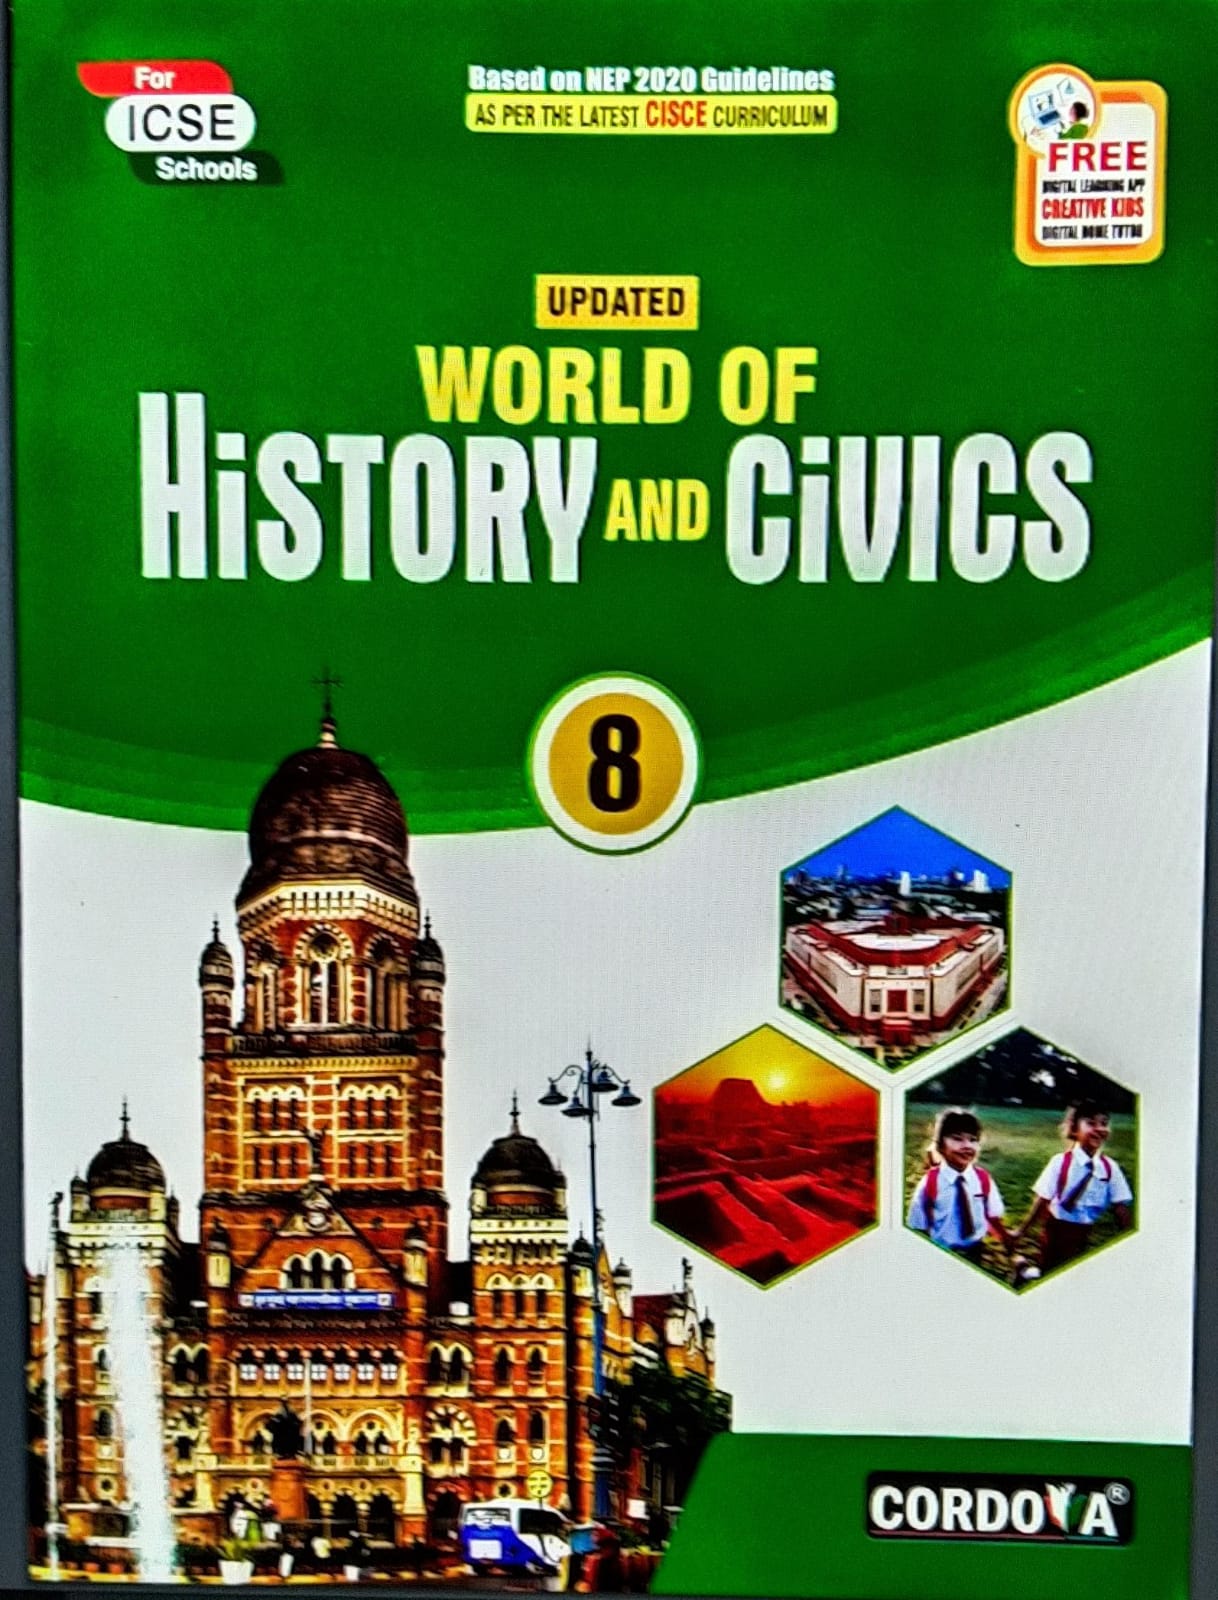 Updated World Of History And Civics Class 8 
For Icse